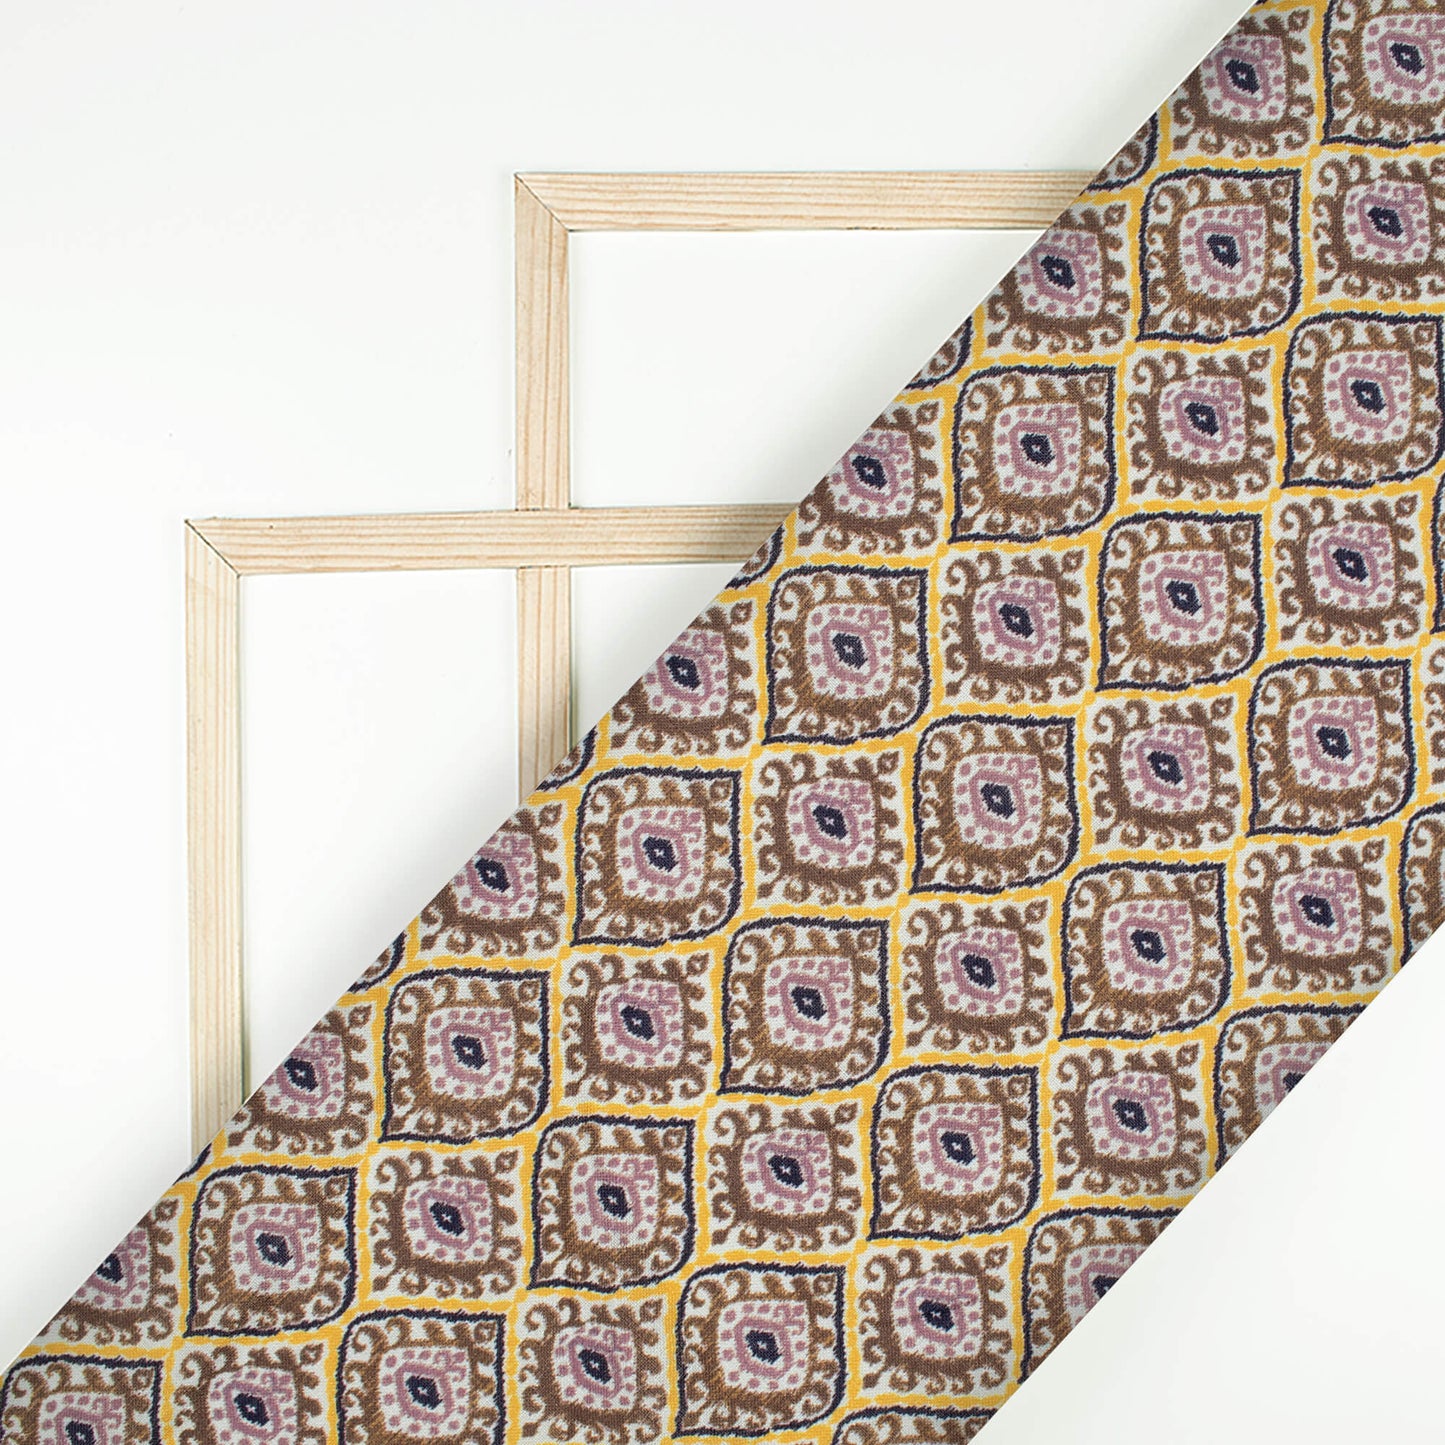 Coffee Brown And Honey Yellow Trellis Pattern Digital Print Linen Textured Fabric (Width 56 Inches)